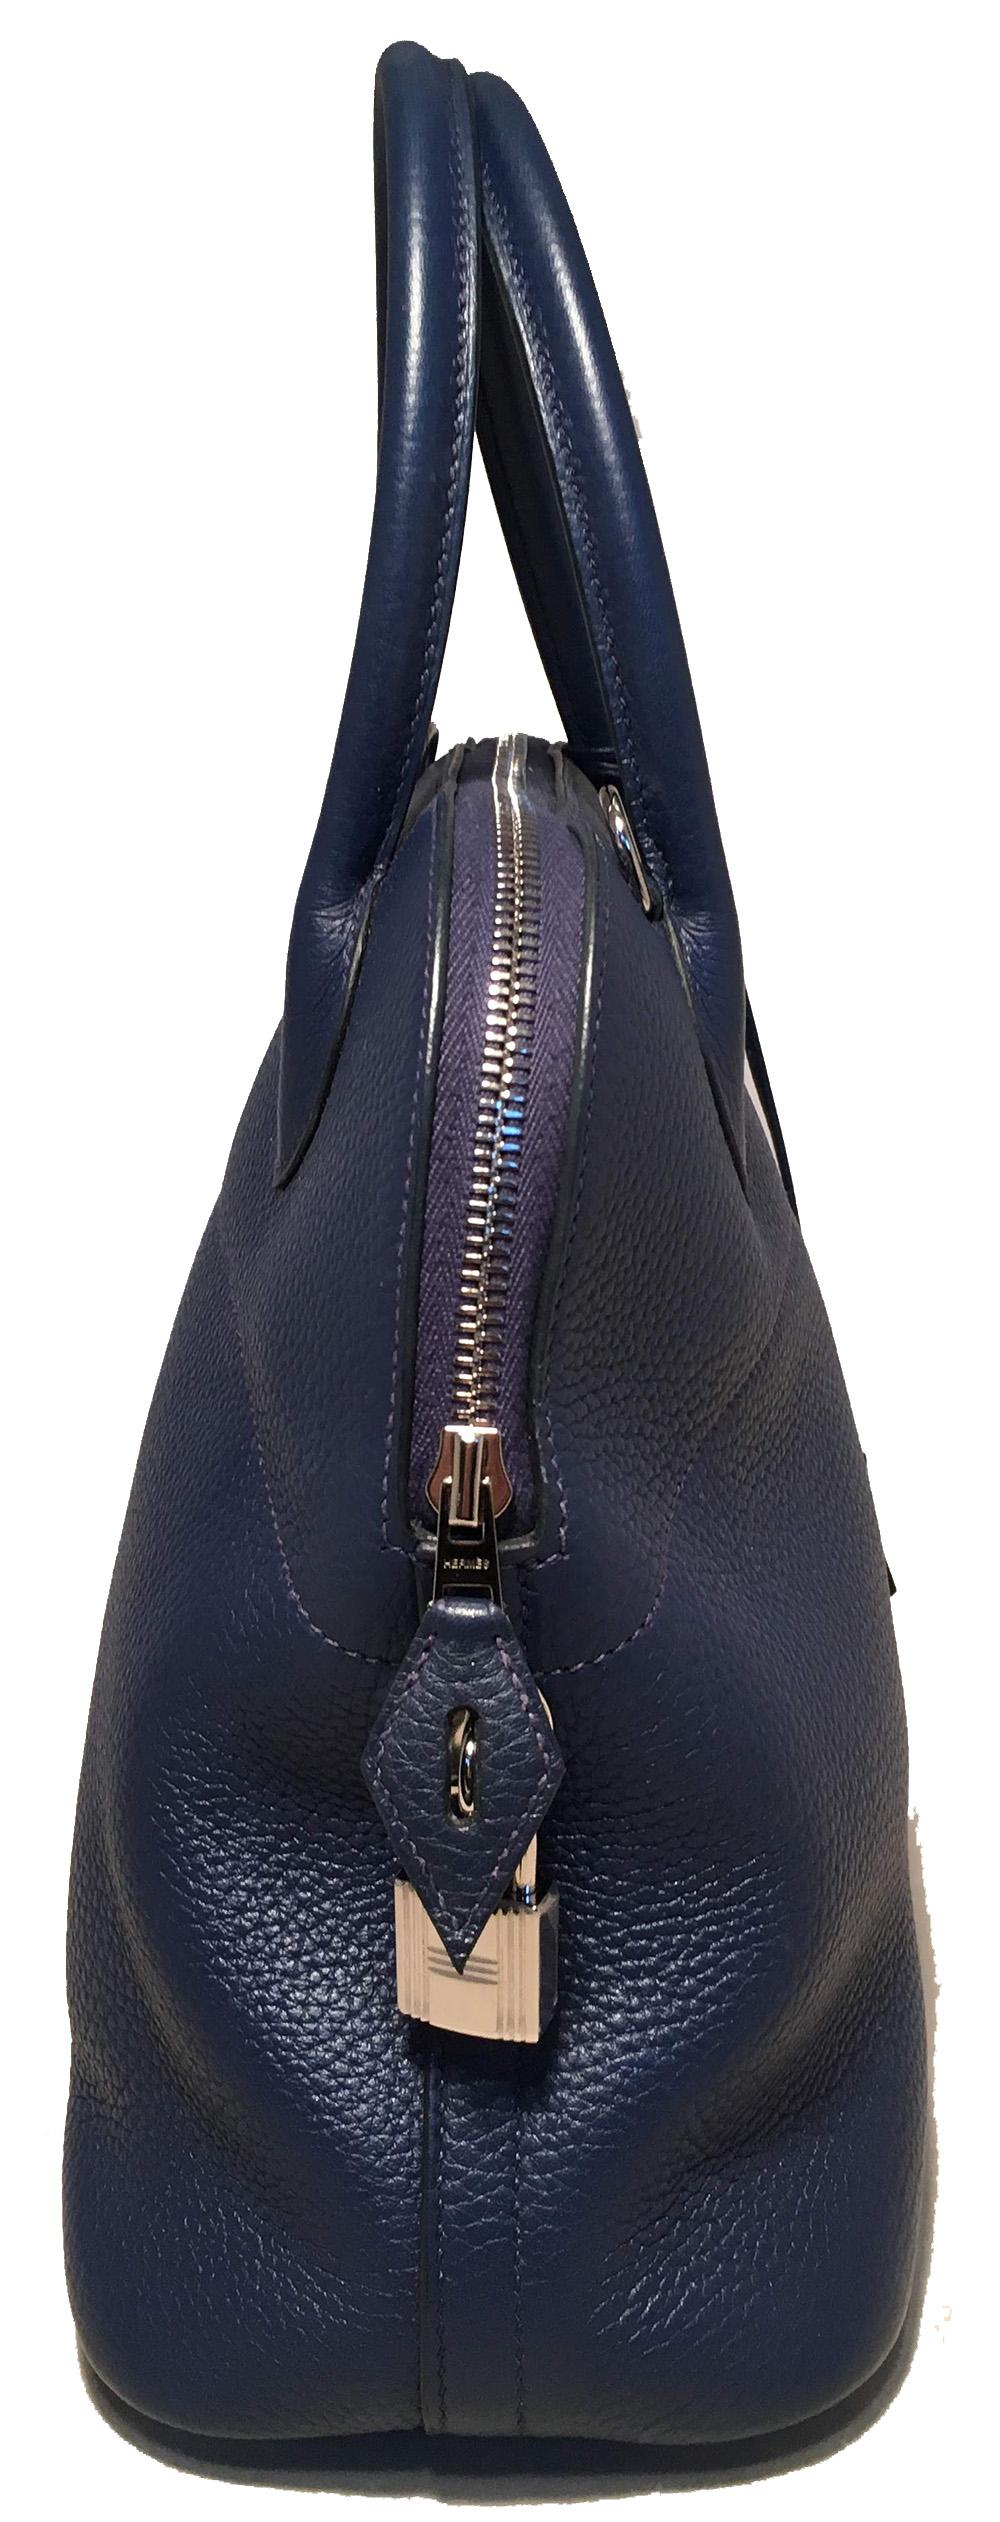 Hermes Navy Blue Clemence 31cm Bolide Bag and Shoulder Strap in excellent condition. Navy clemence leather exterior trimmed with silver palladium hardware. Removable shoulder strap. Top zipper closure opens to a navy kidskin lined interior with one